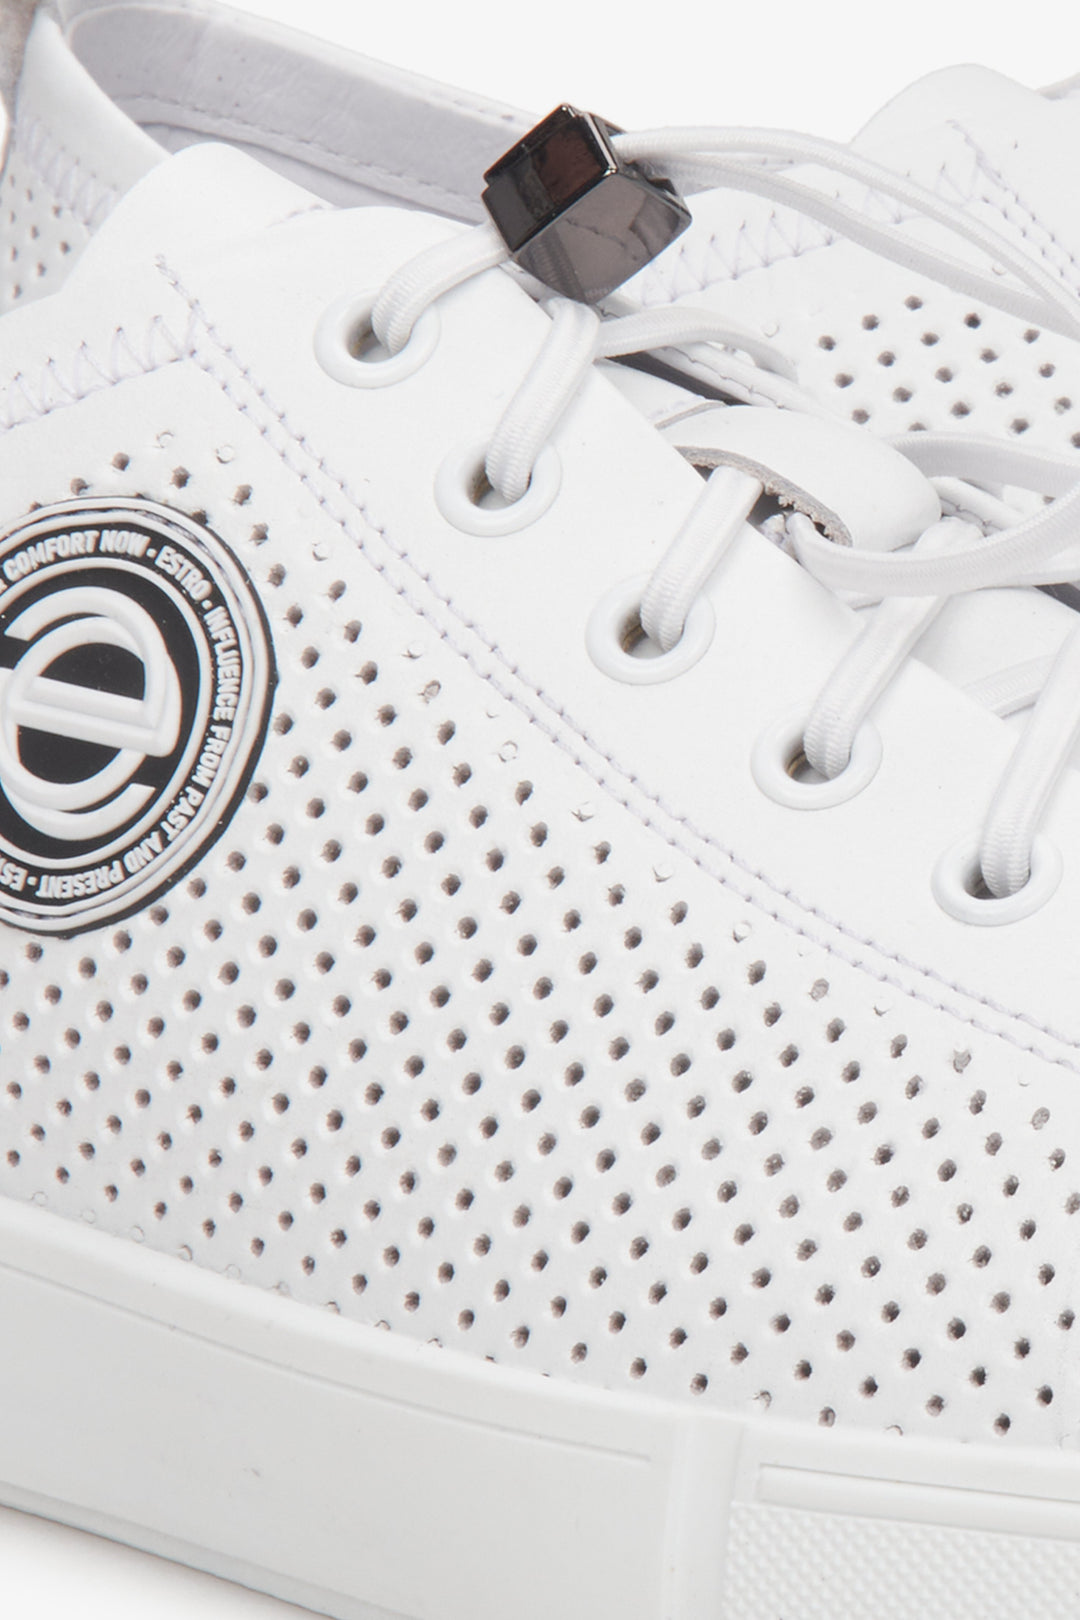 Men's summer perforated shoes in white - close-up on details.